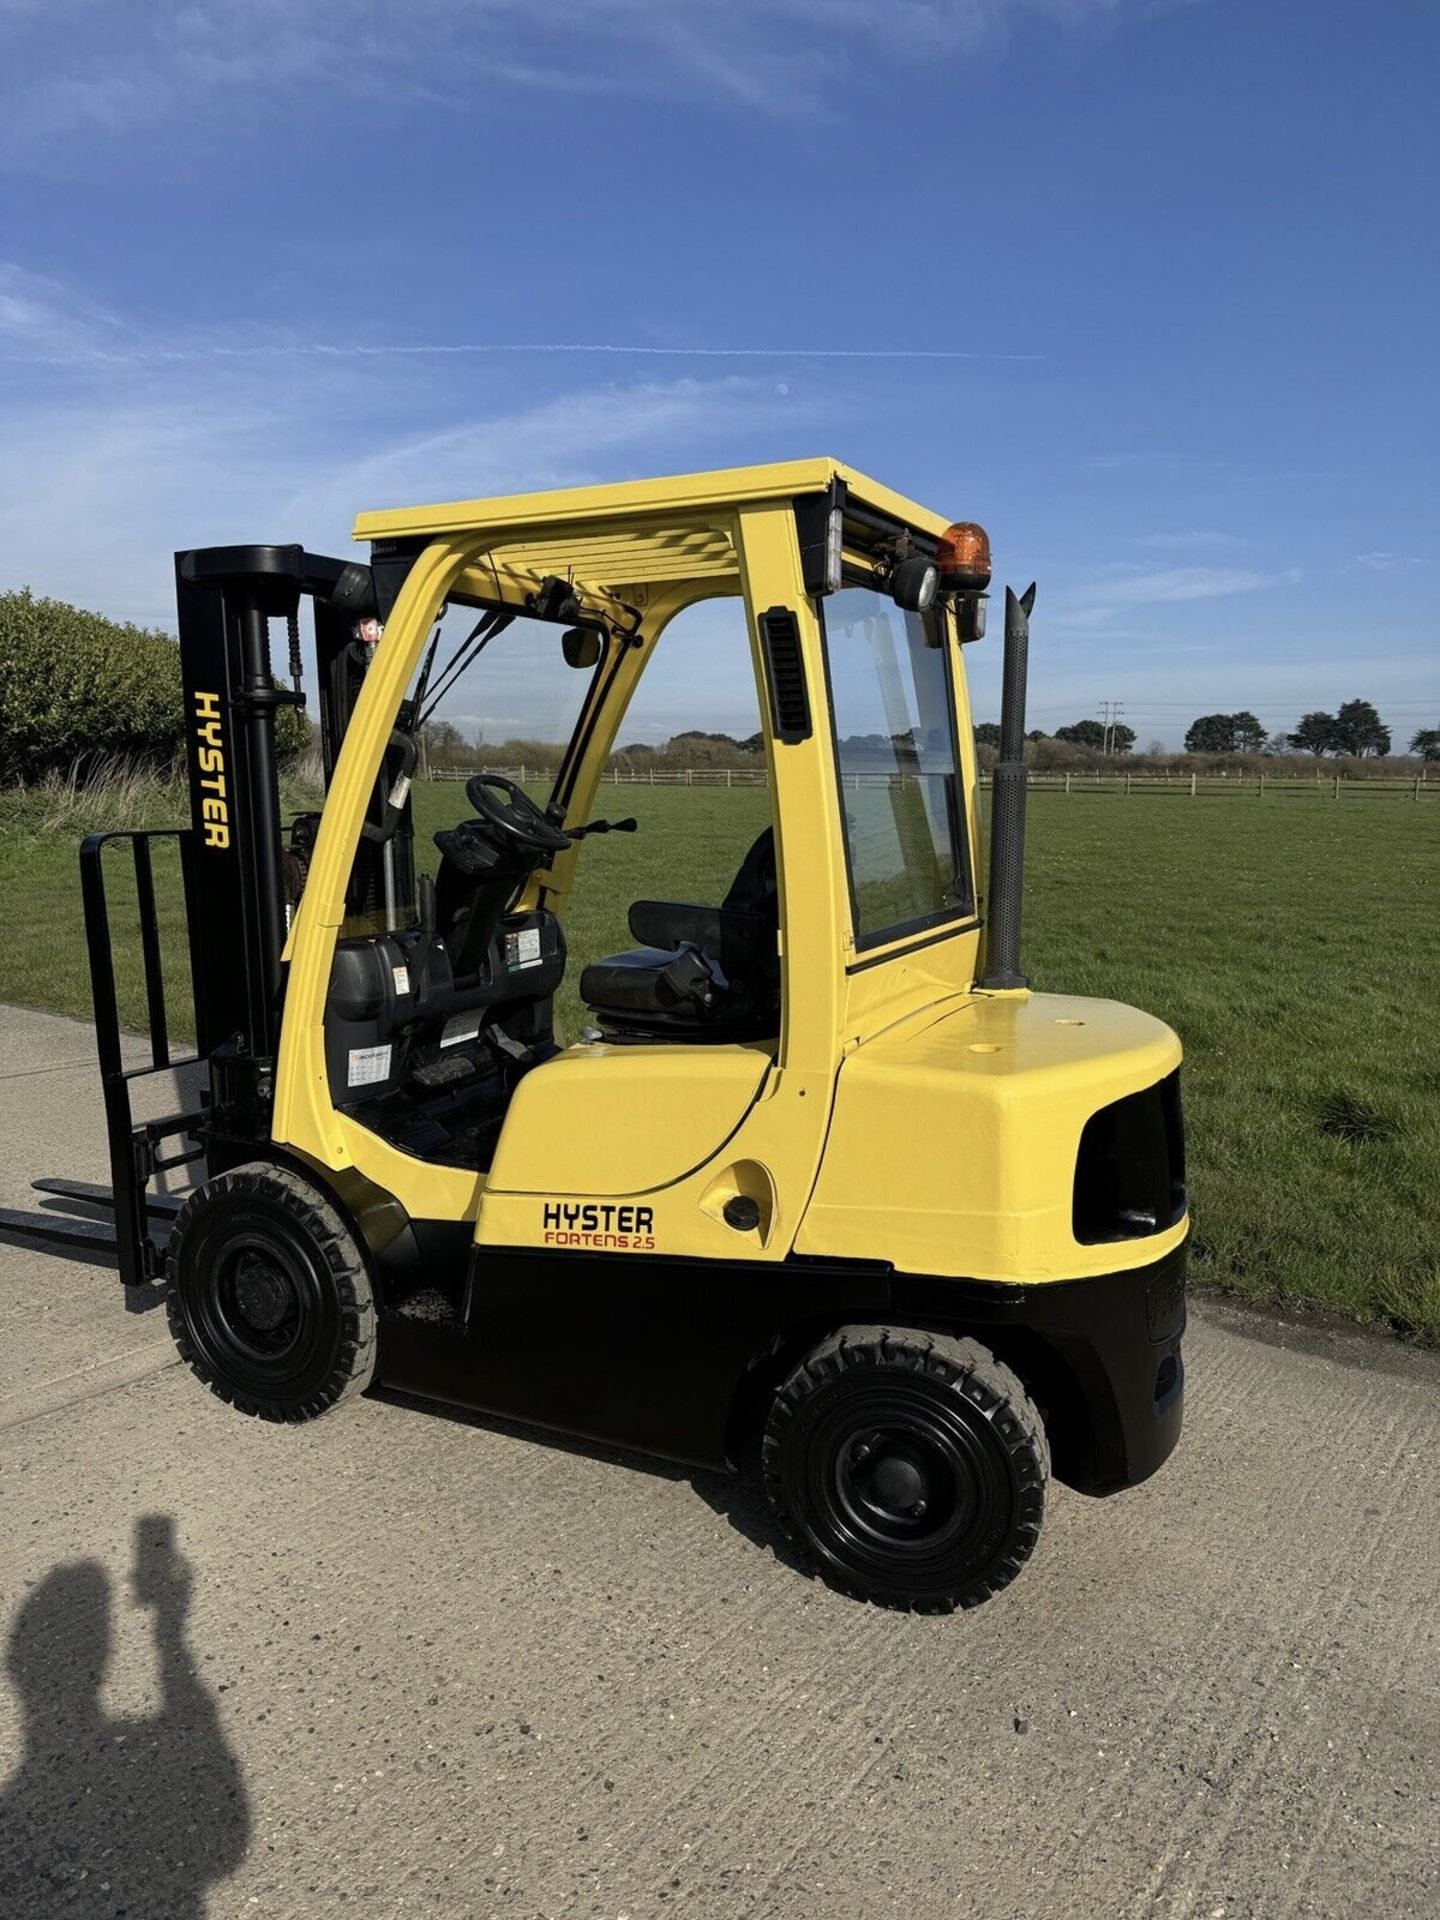 2008 - HYSTER, 2.5 Tonne Diesel Forklift (Container Spec) - Image 5 of 5